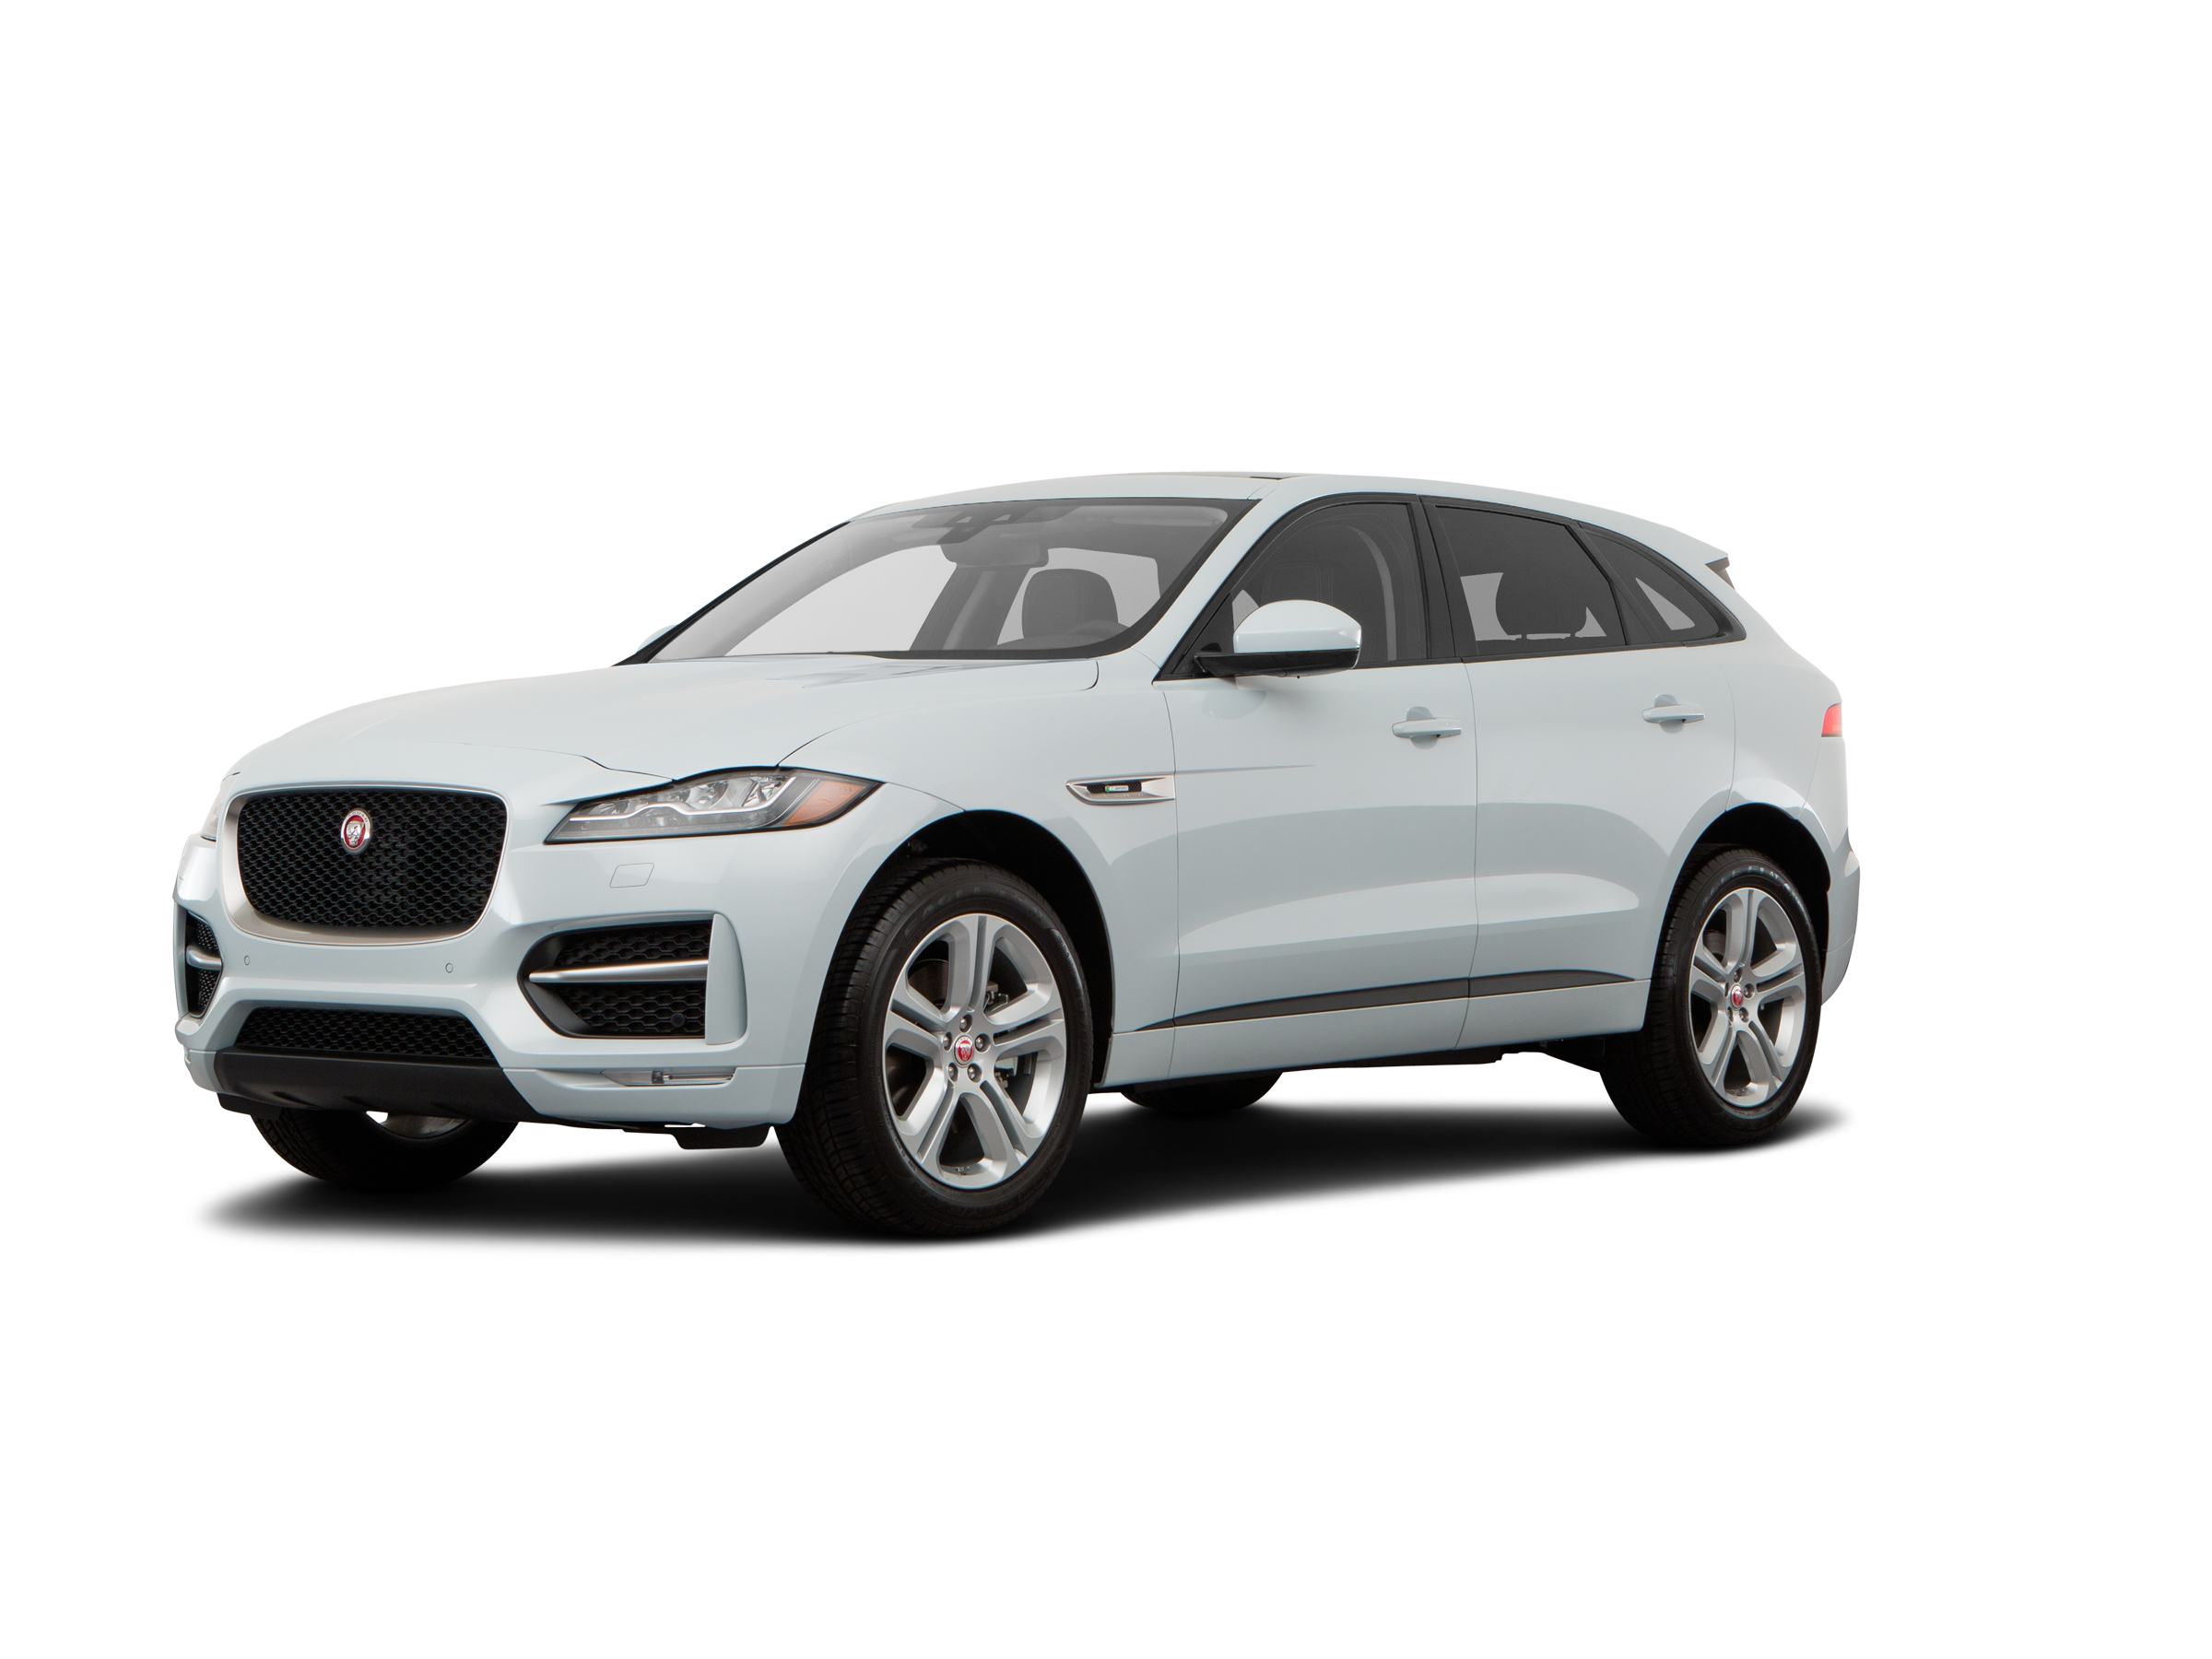 Used 2018 Jaguar F-PACE 30t R-Sport SUV 4D Prices | Kelley Blue Book